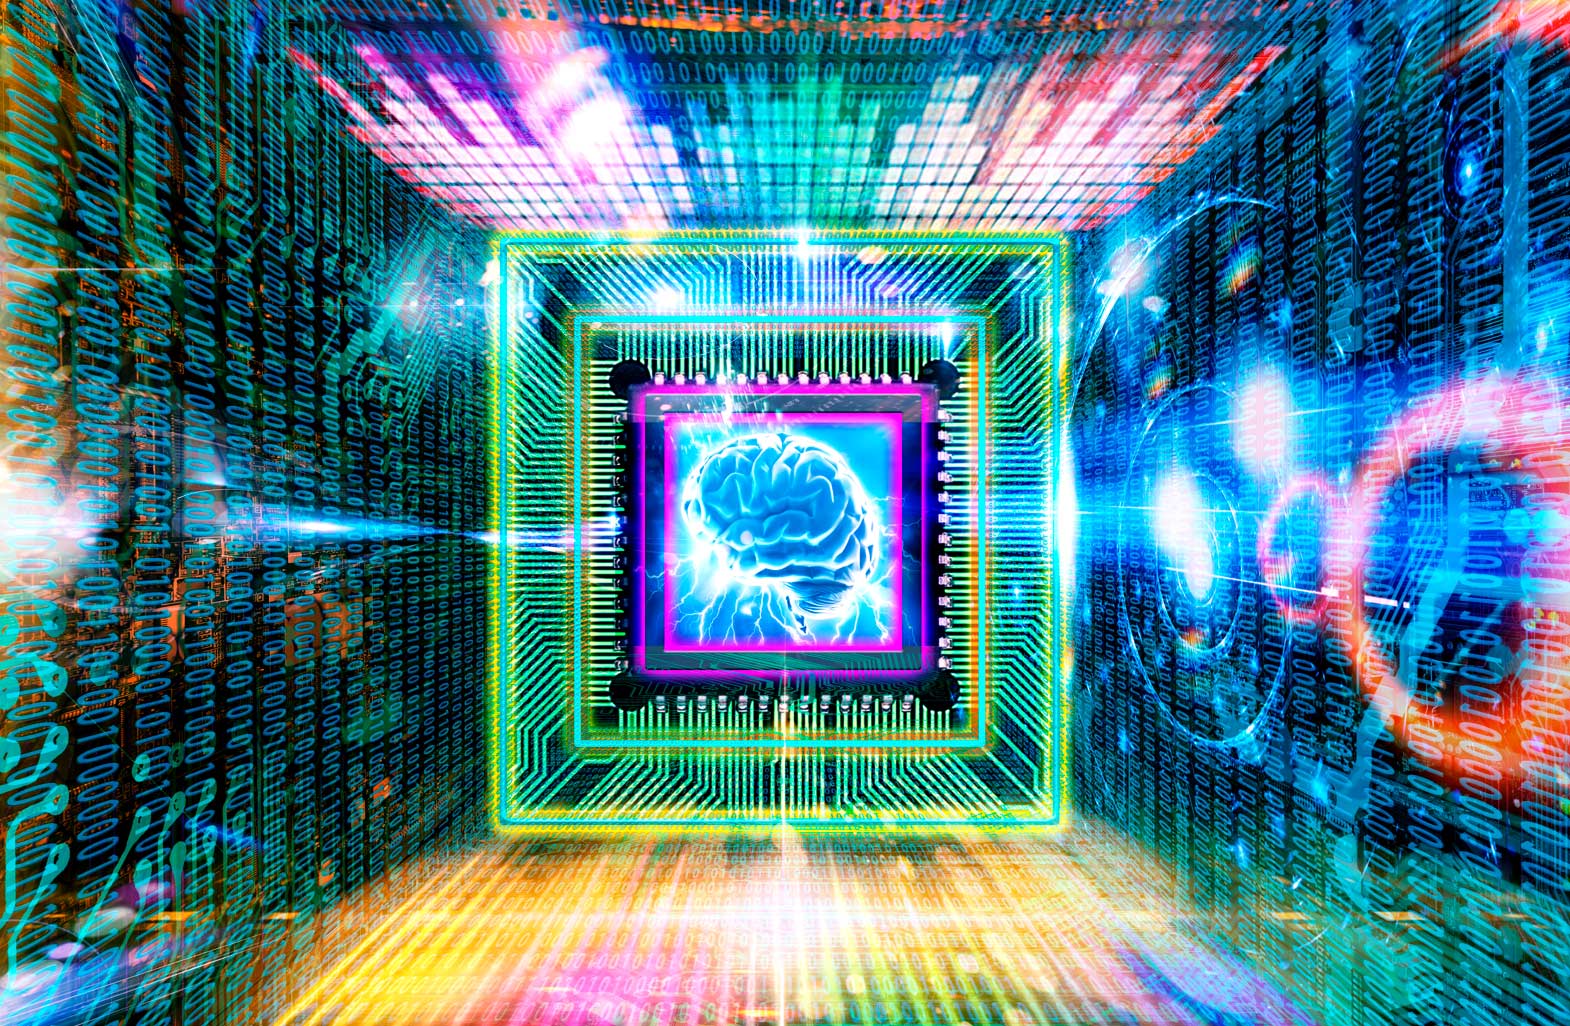 Illustrated computer chip with a brain